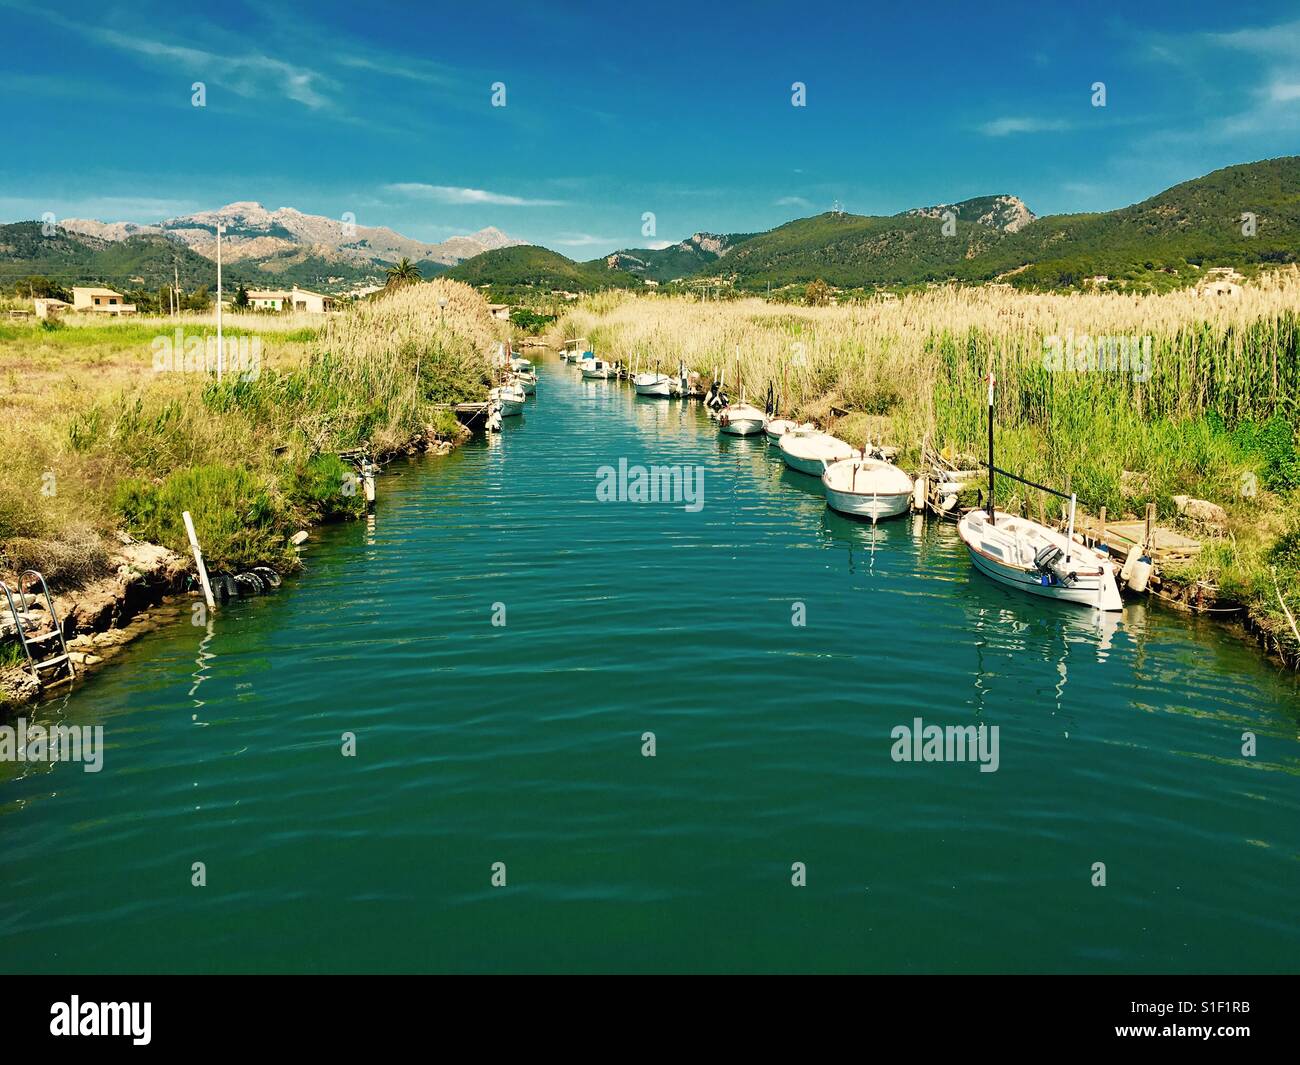 Boats on a small river with tall grass around and mountains in the background Stock Photo